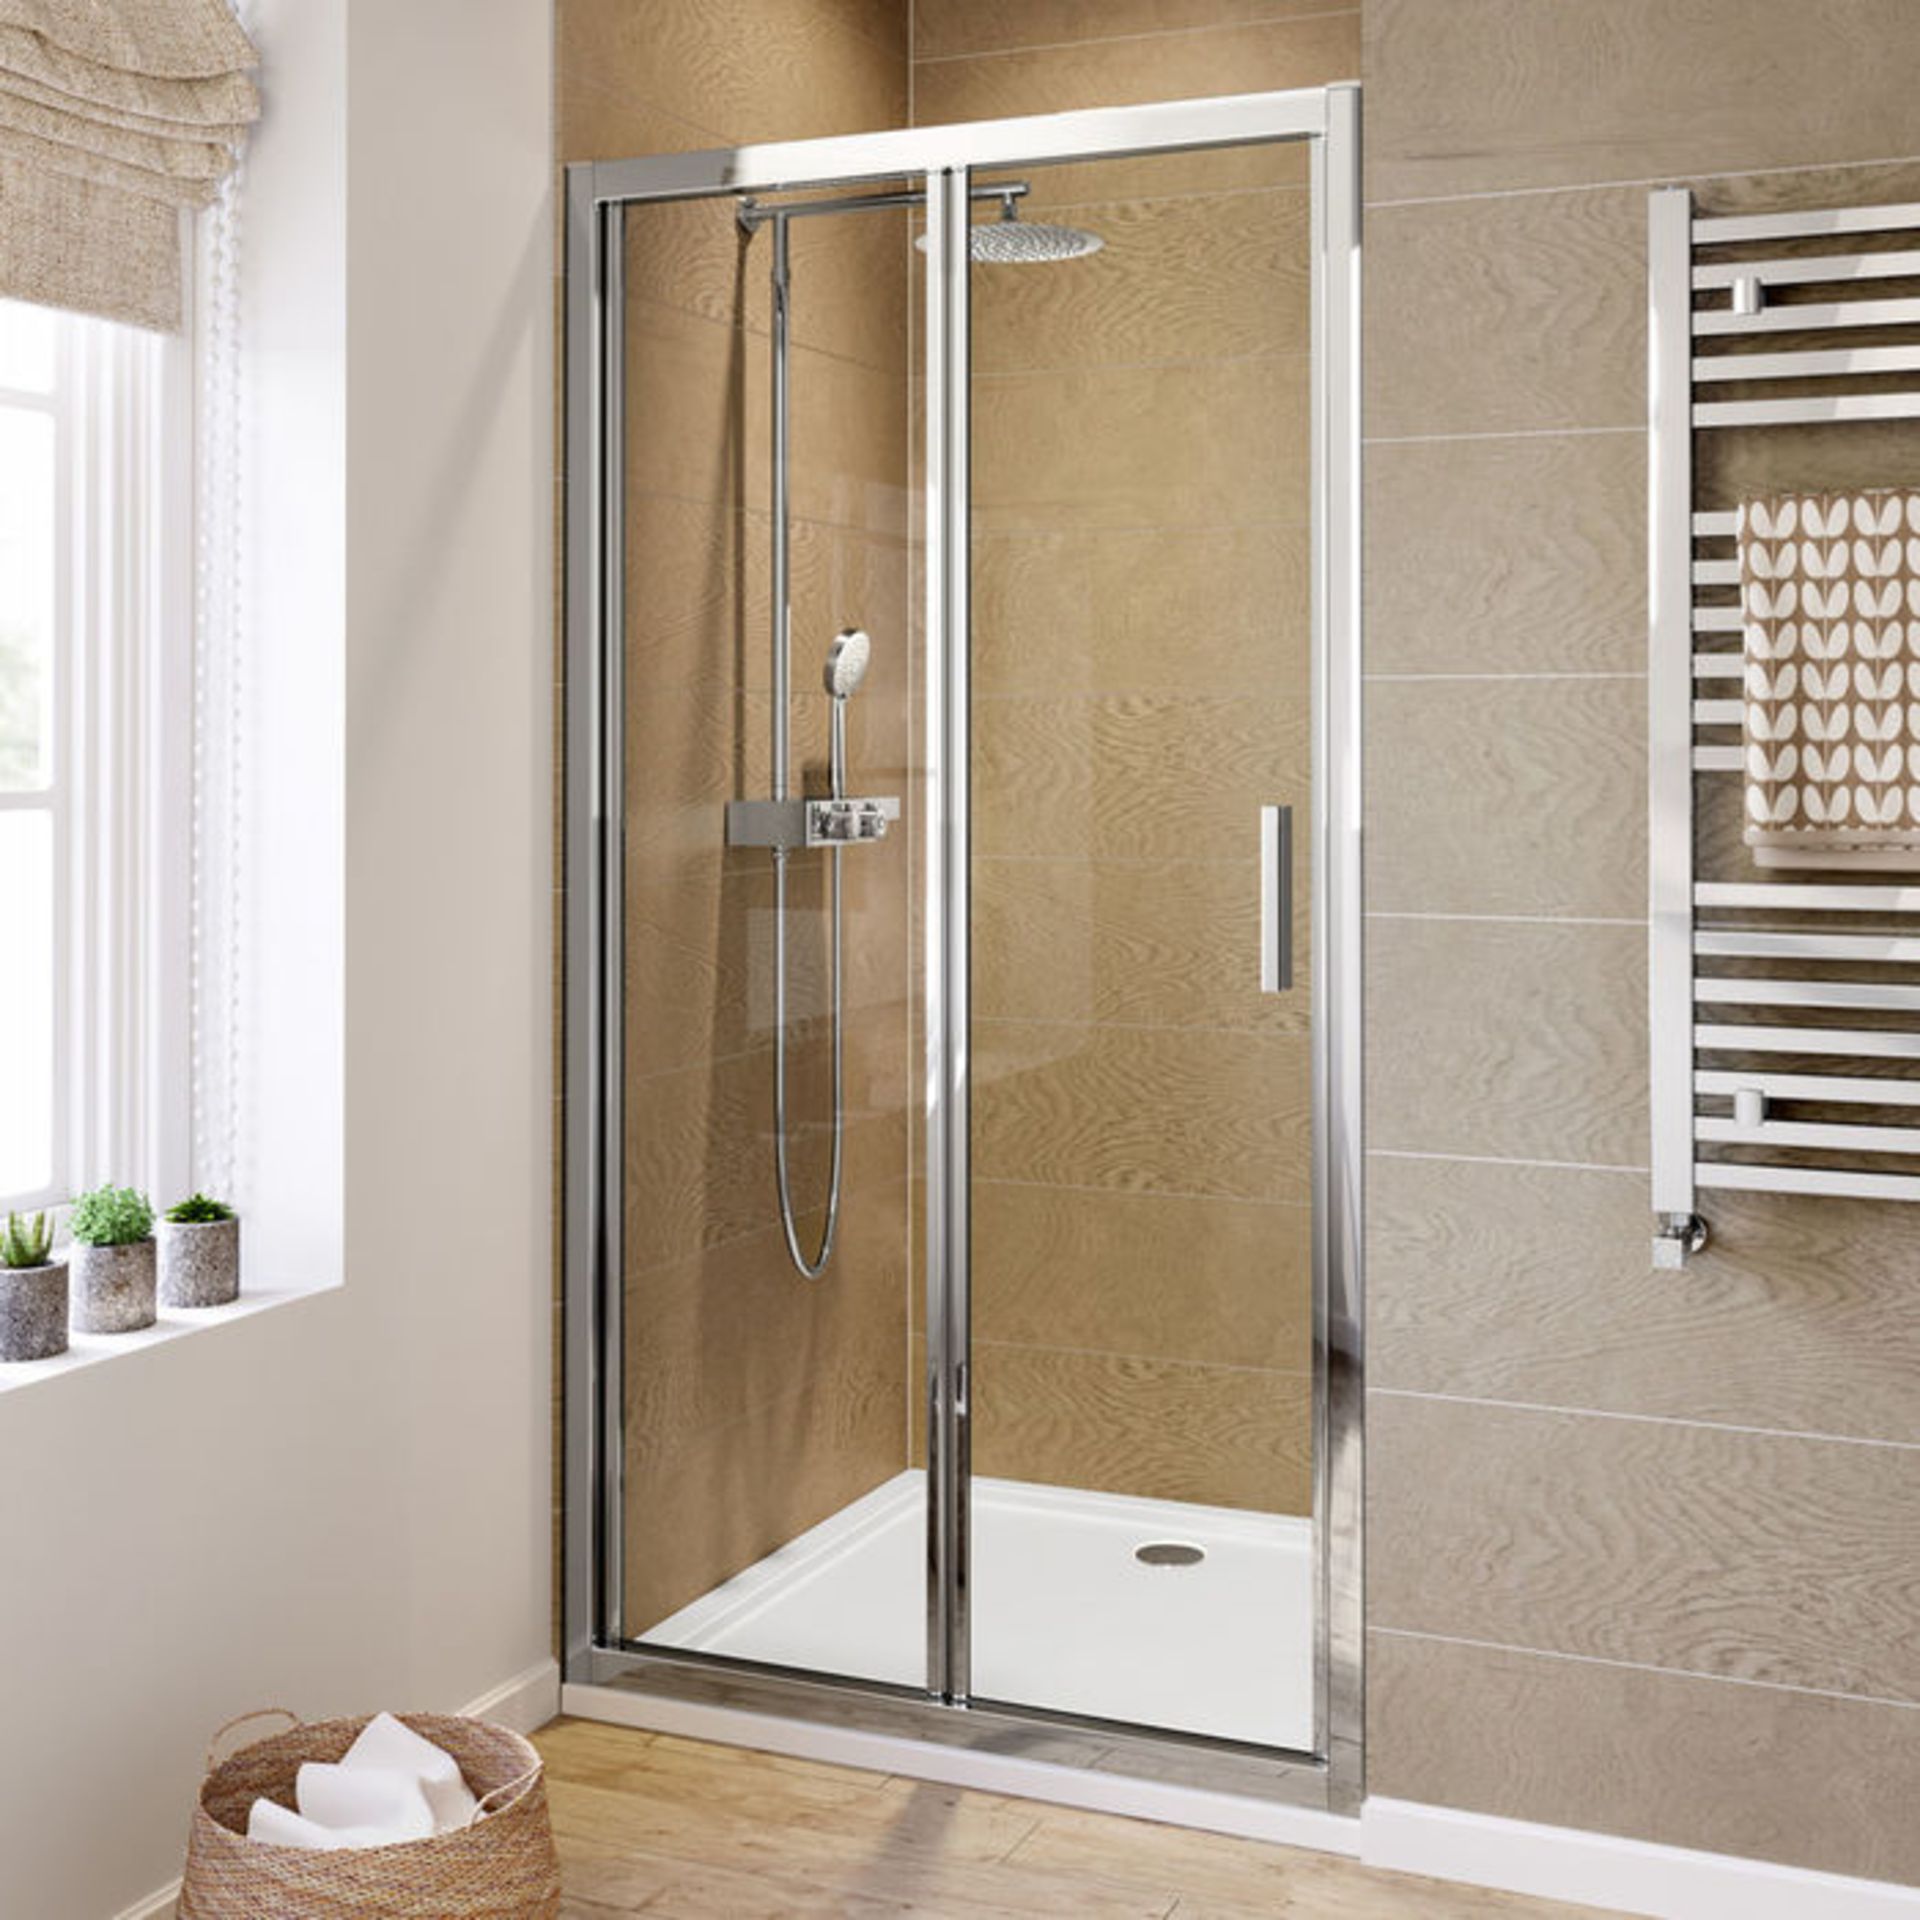 (JF30) 1000mm - 6mm - Elements EasyClean Bifold Shower Door. 6mm Safety Glass - Single-sided Ea... - Image 2 of 4